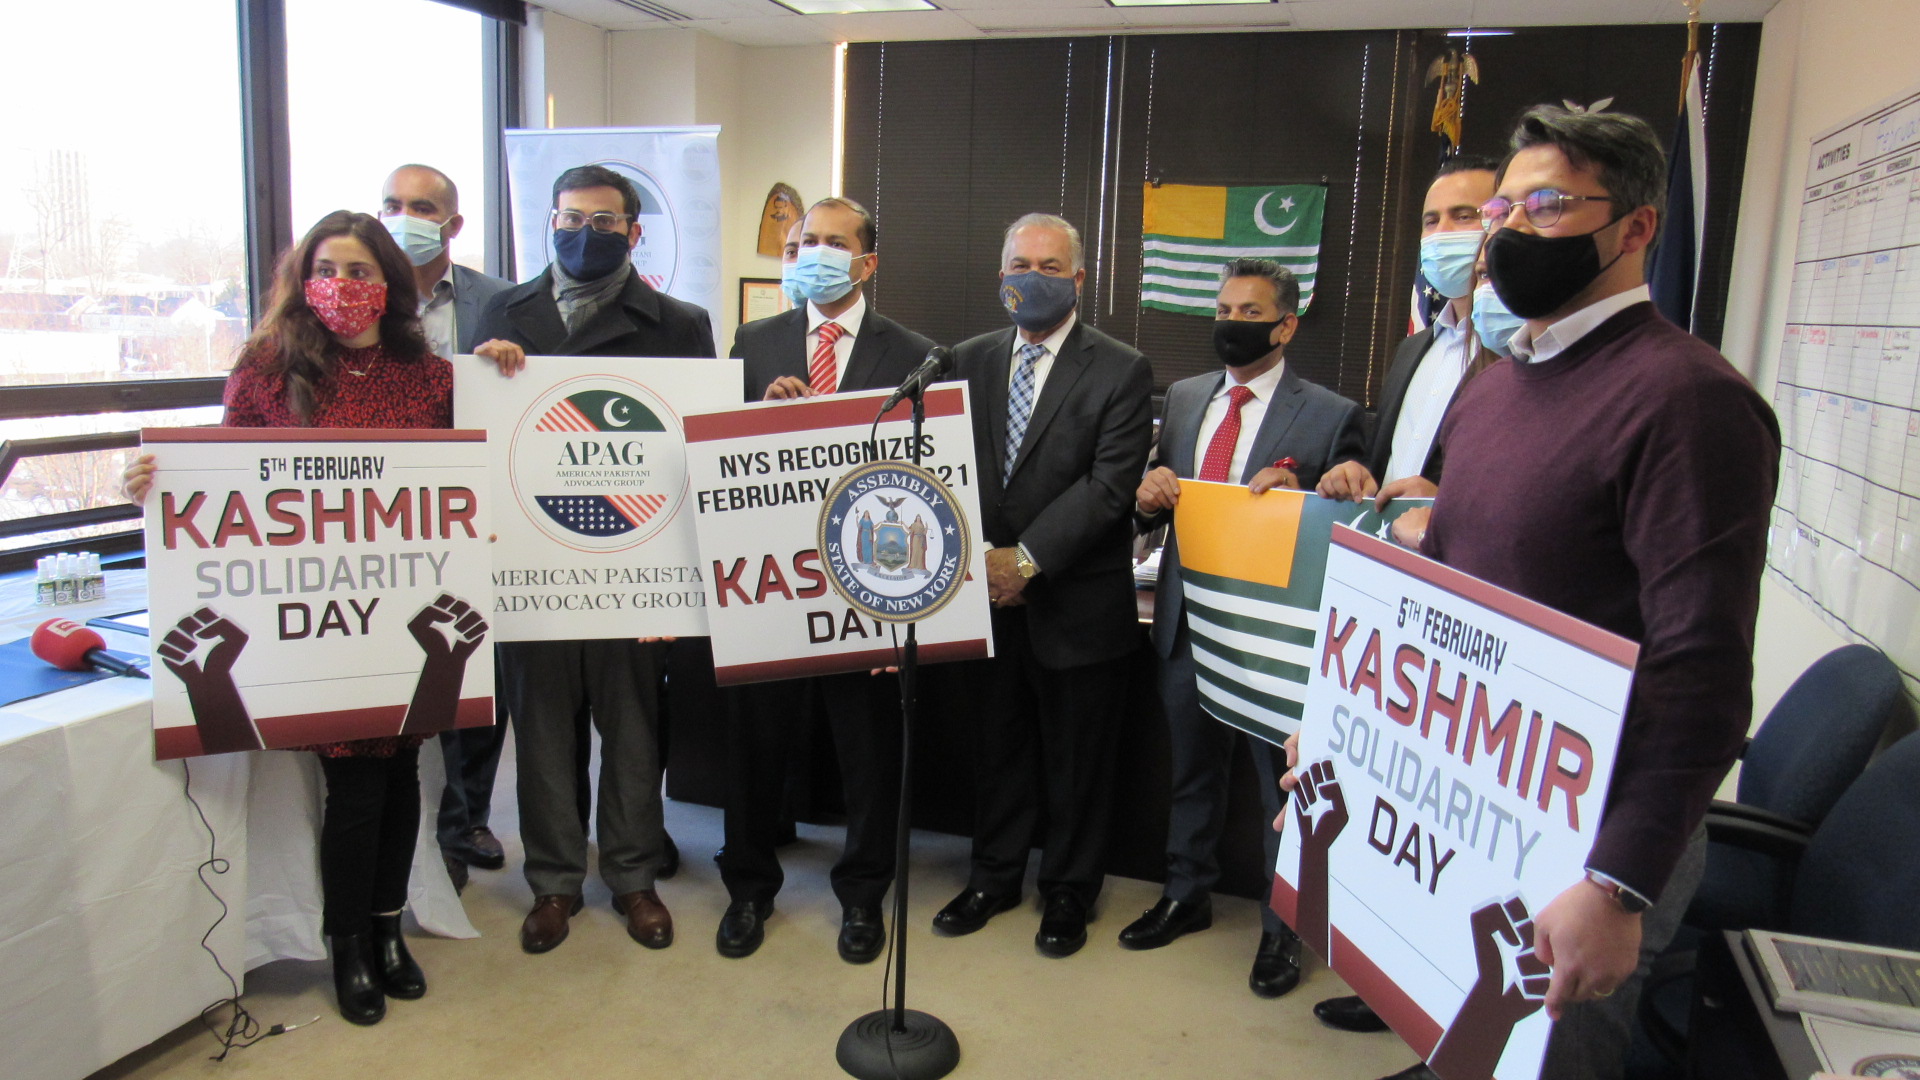 Assemblyman Sayegh meets with members of the American Pakistani Advocacy Group on Kashmir-American Day, February 5.